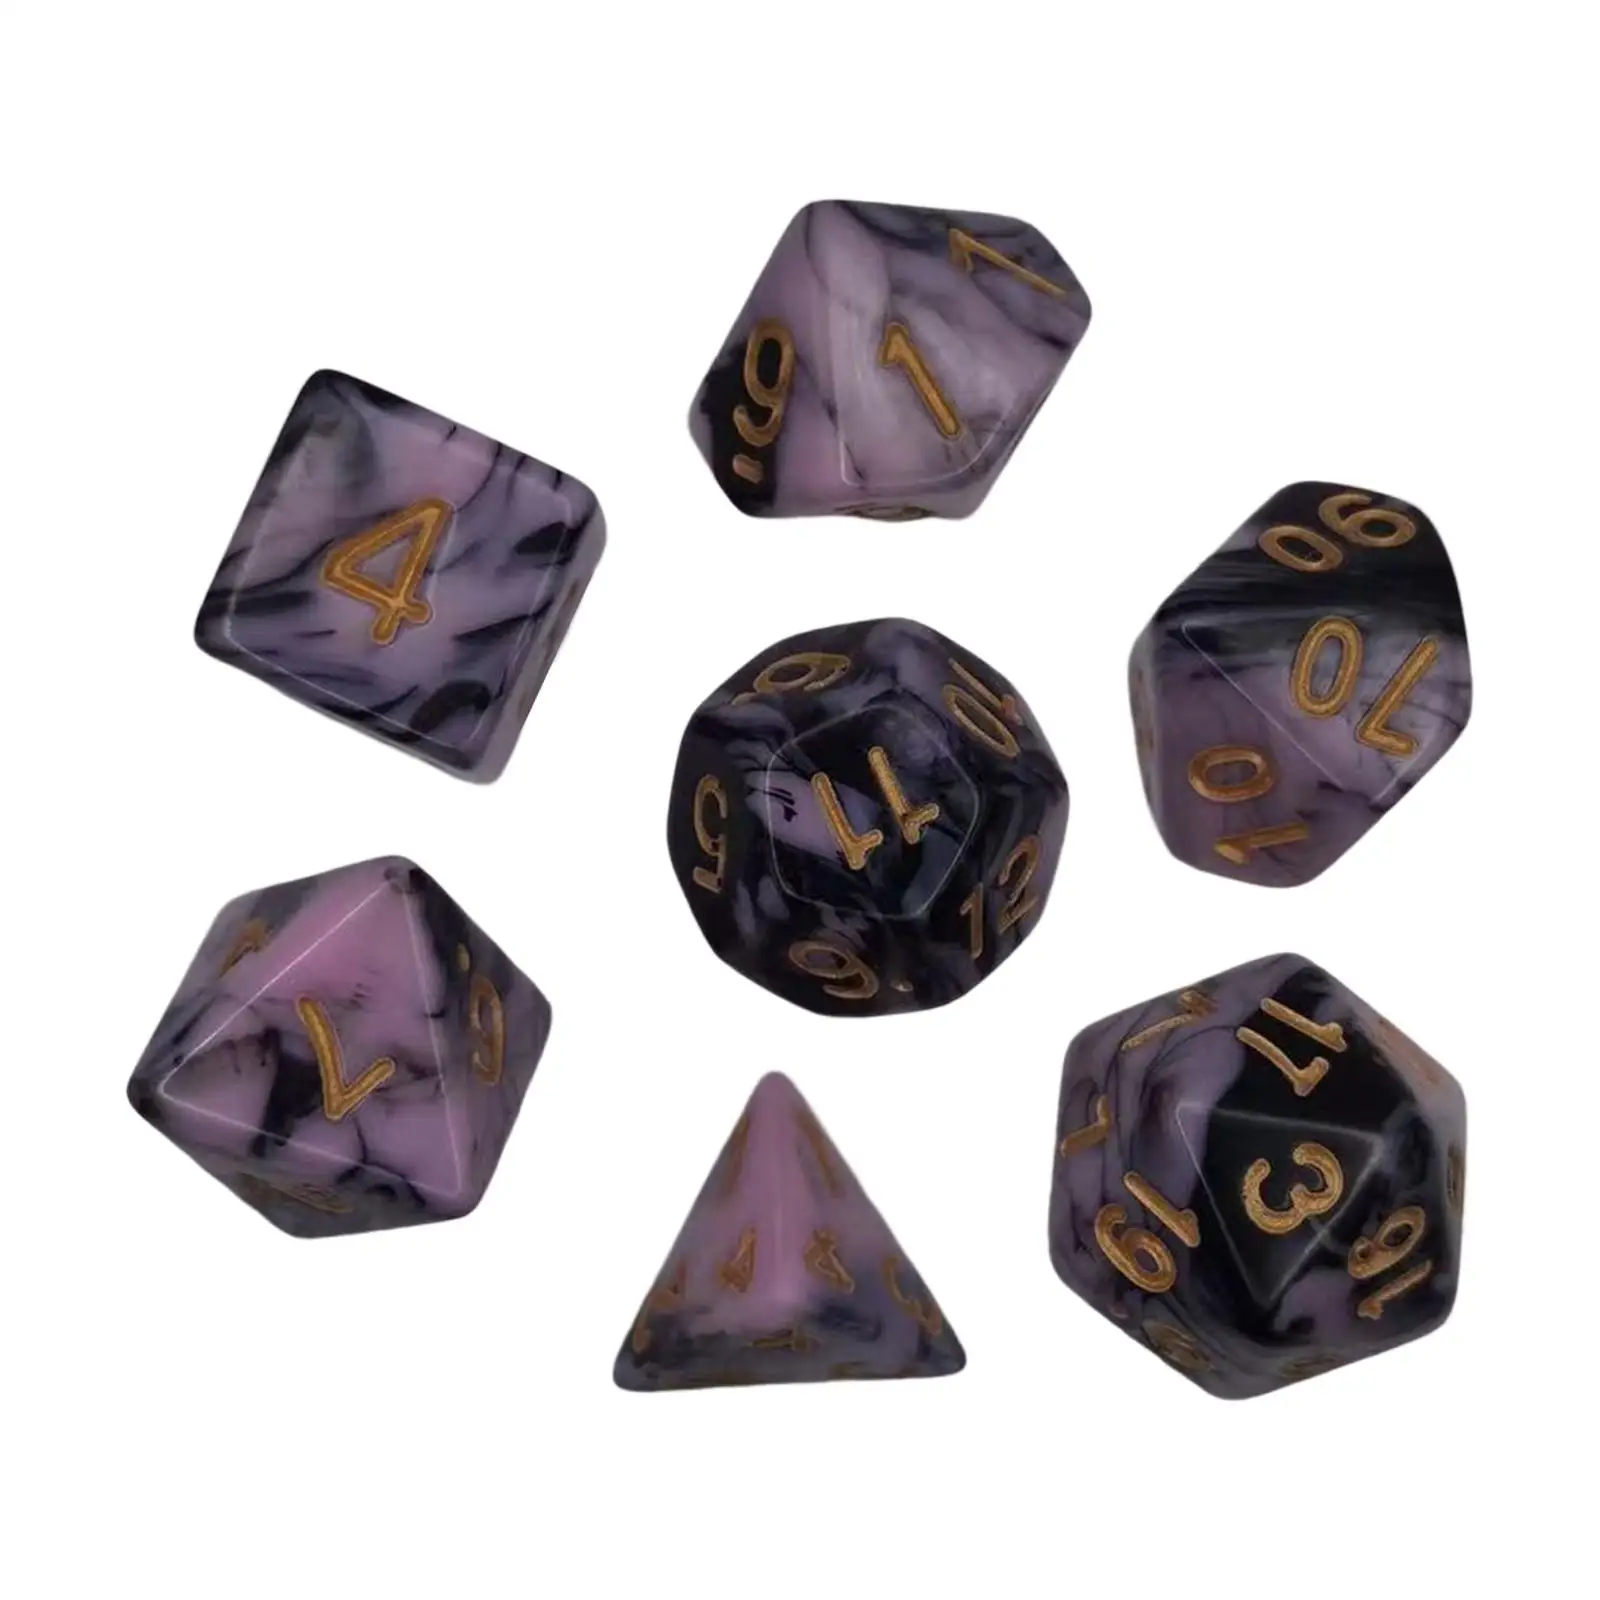 7x Polyhedral Dices Entertainment Toys Smooth Surface d6 d4 D8 D10 D12 D20 Polyhedron Dice for Family Gathering Tabletop Games